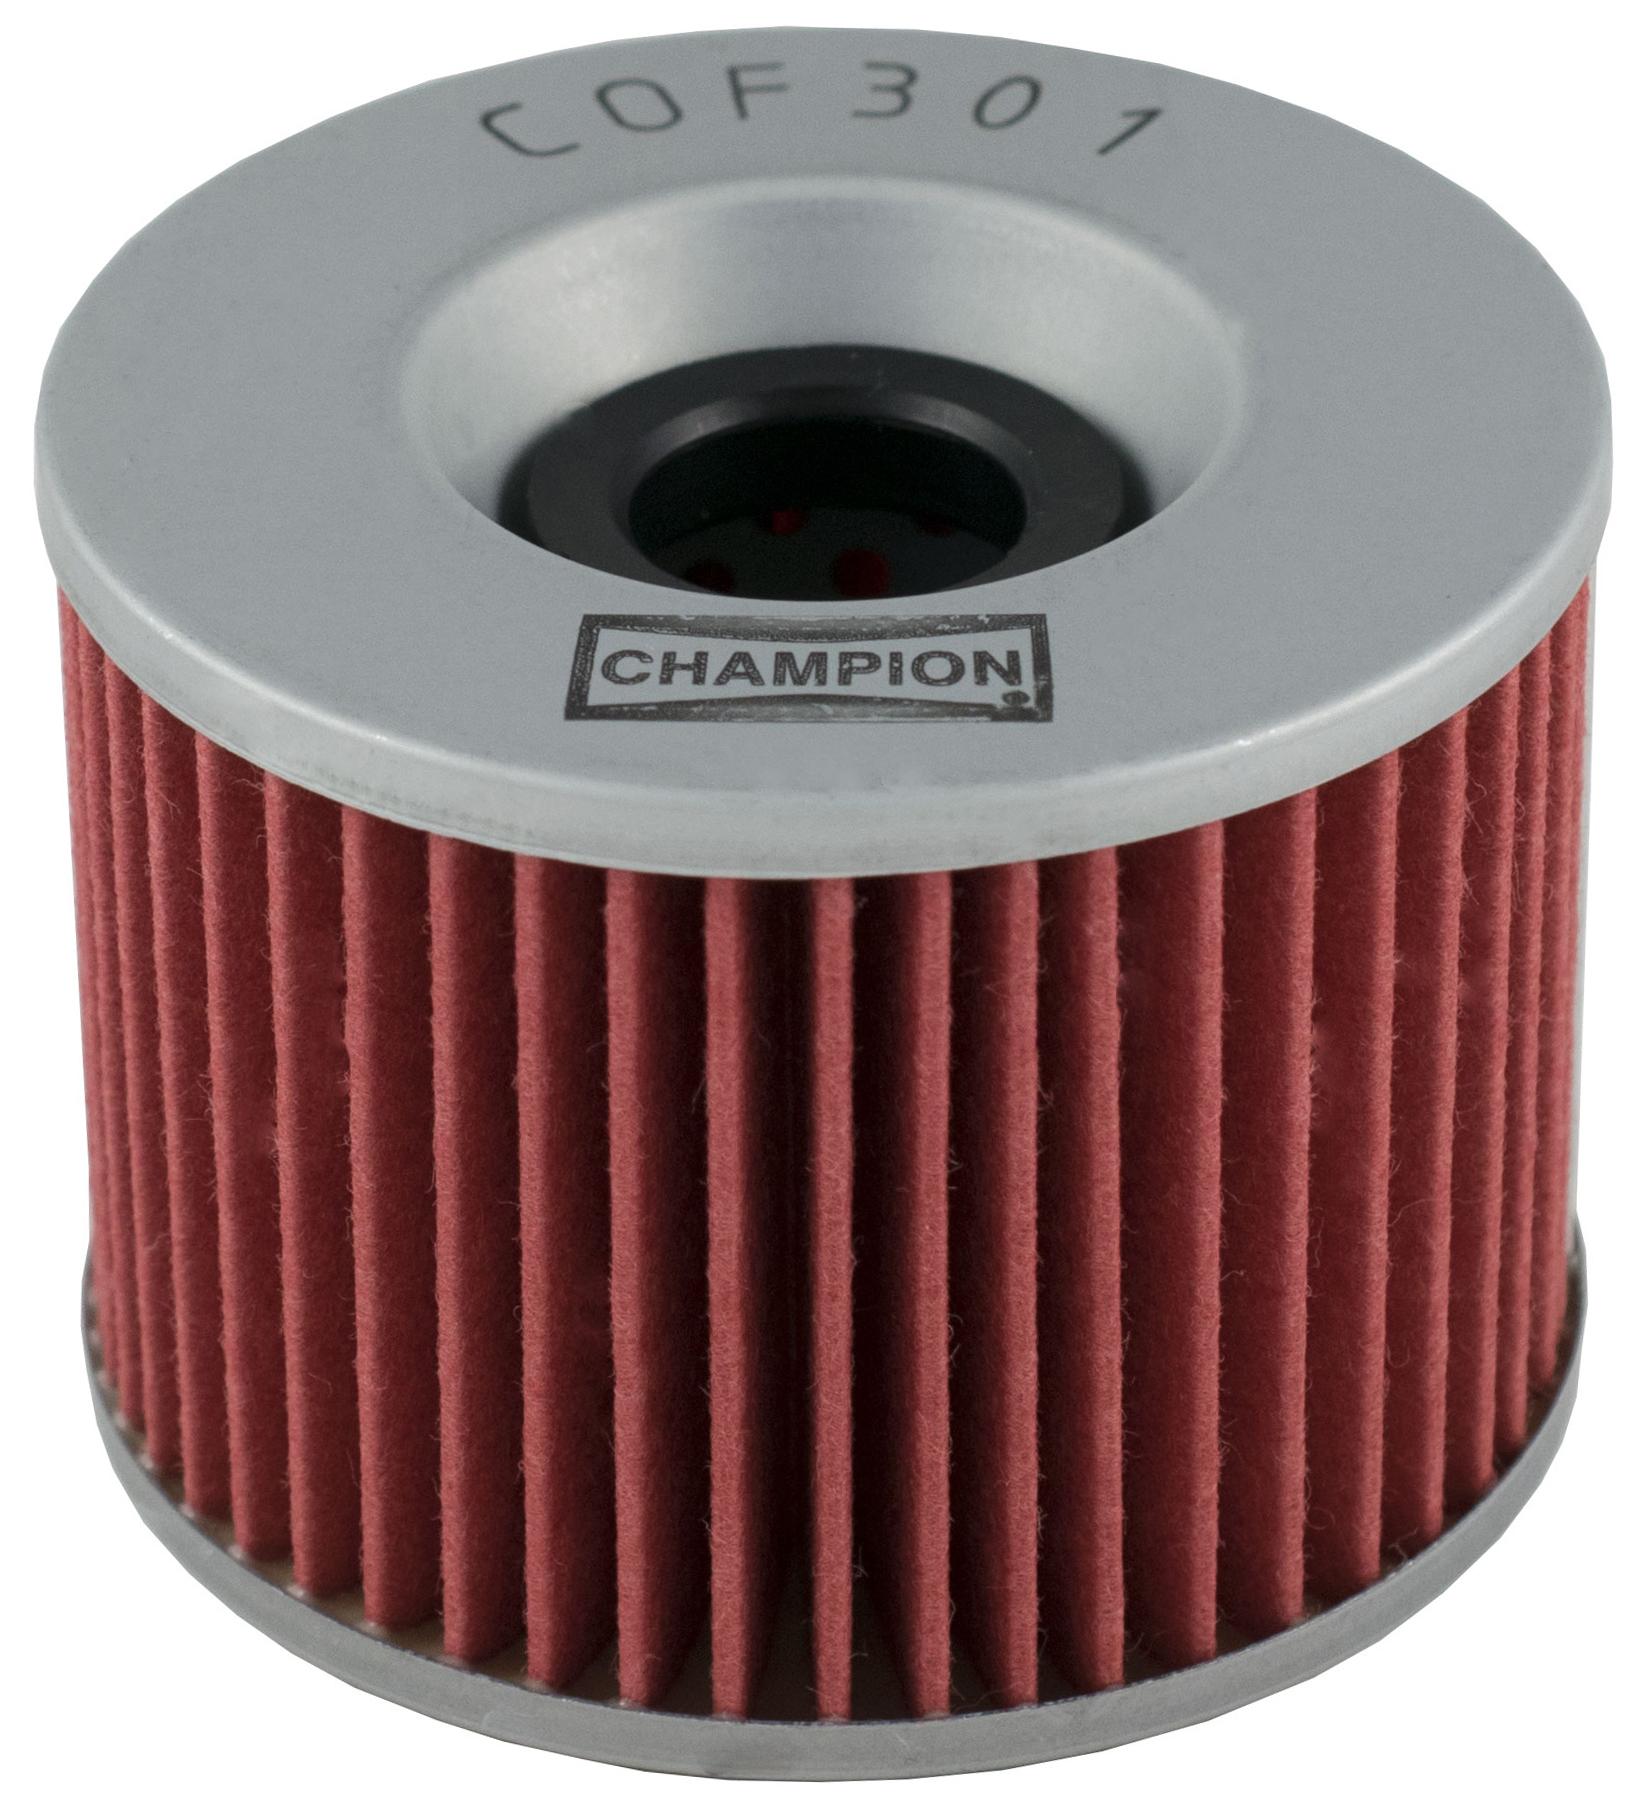 Champion Motorcycle Oil Filter Cof301